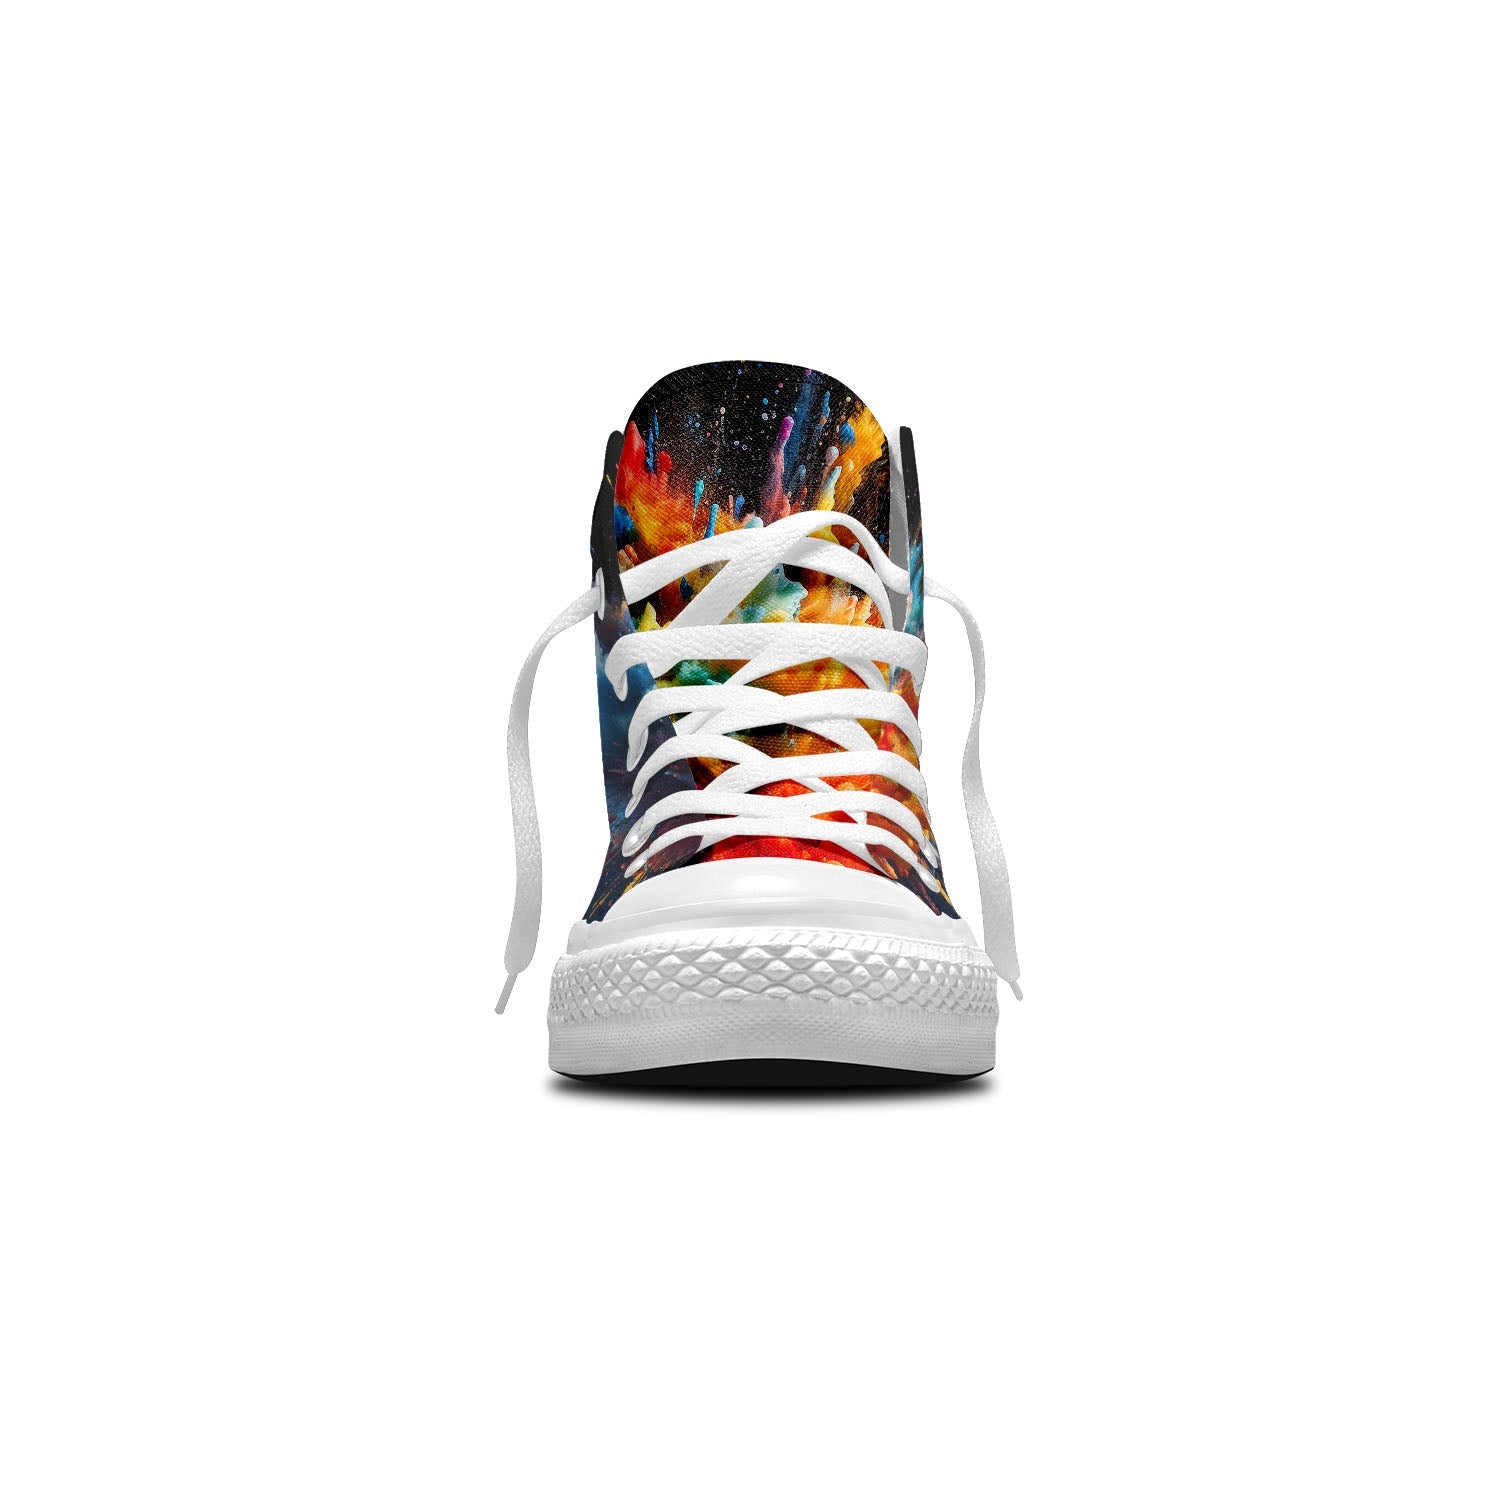 Fireworks Frenzy: Unisex Mid-Top Canvas Shoes - Step into a Burst of Color with Splash Paint Style Fireworks Prints for Men and Women